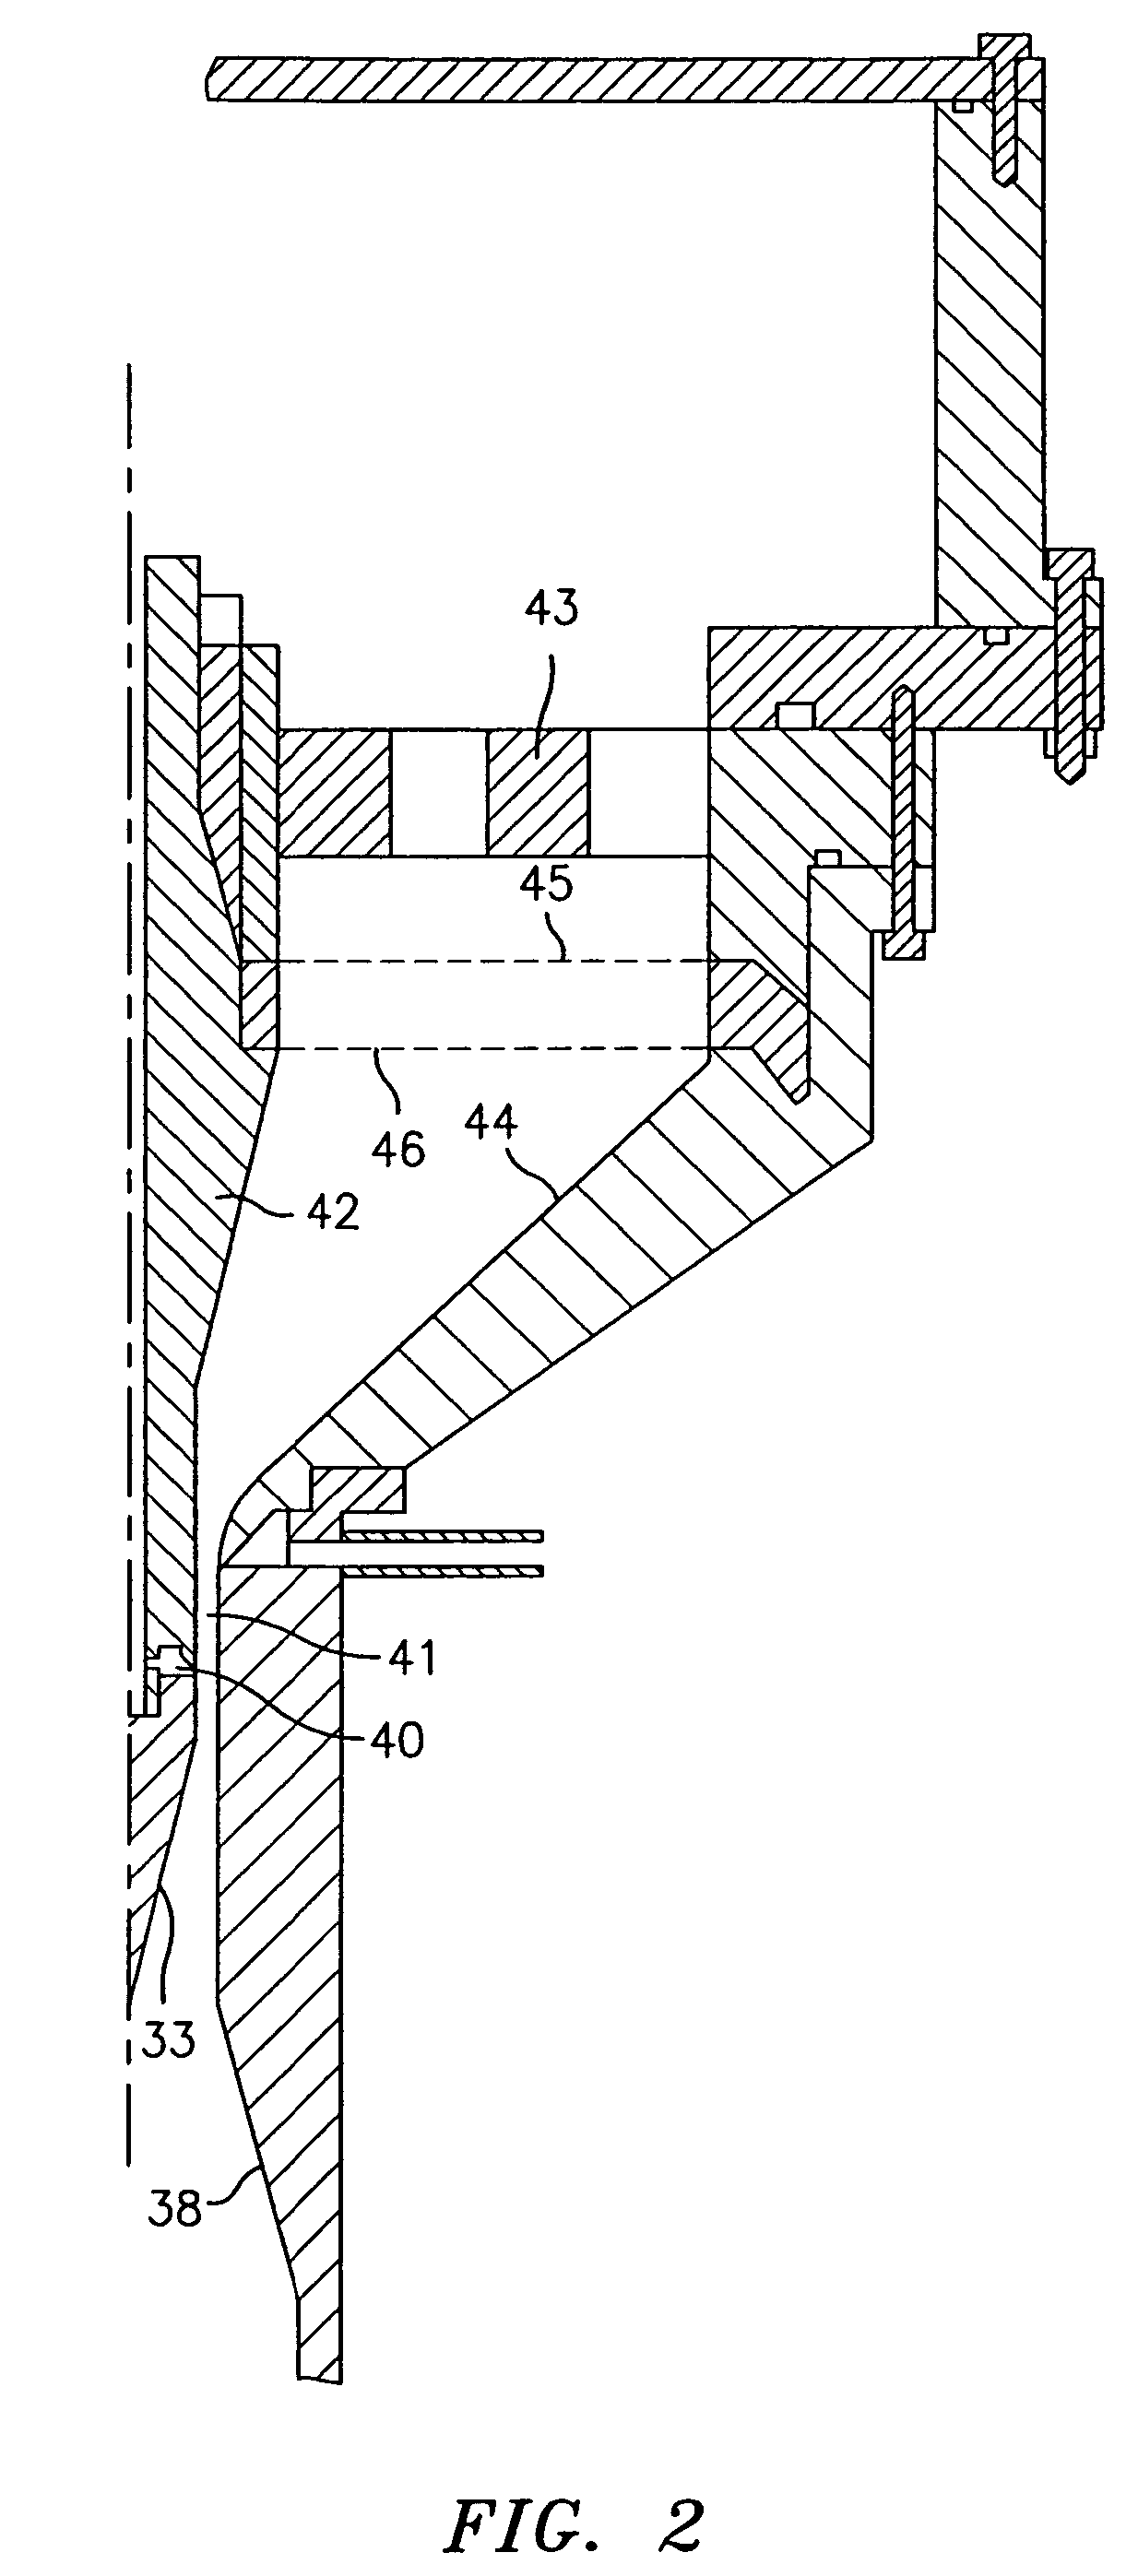 Method and apparatus to increase the resolution and widen the range of differential mobility analyzers (DMAs)